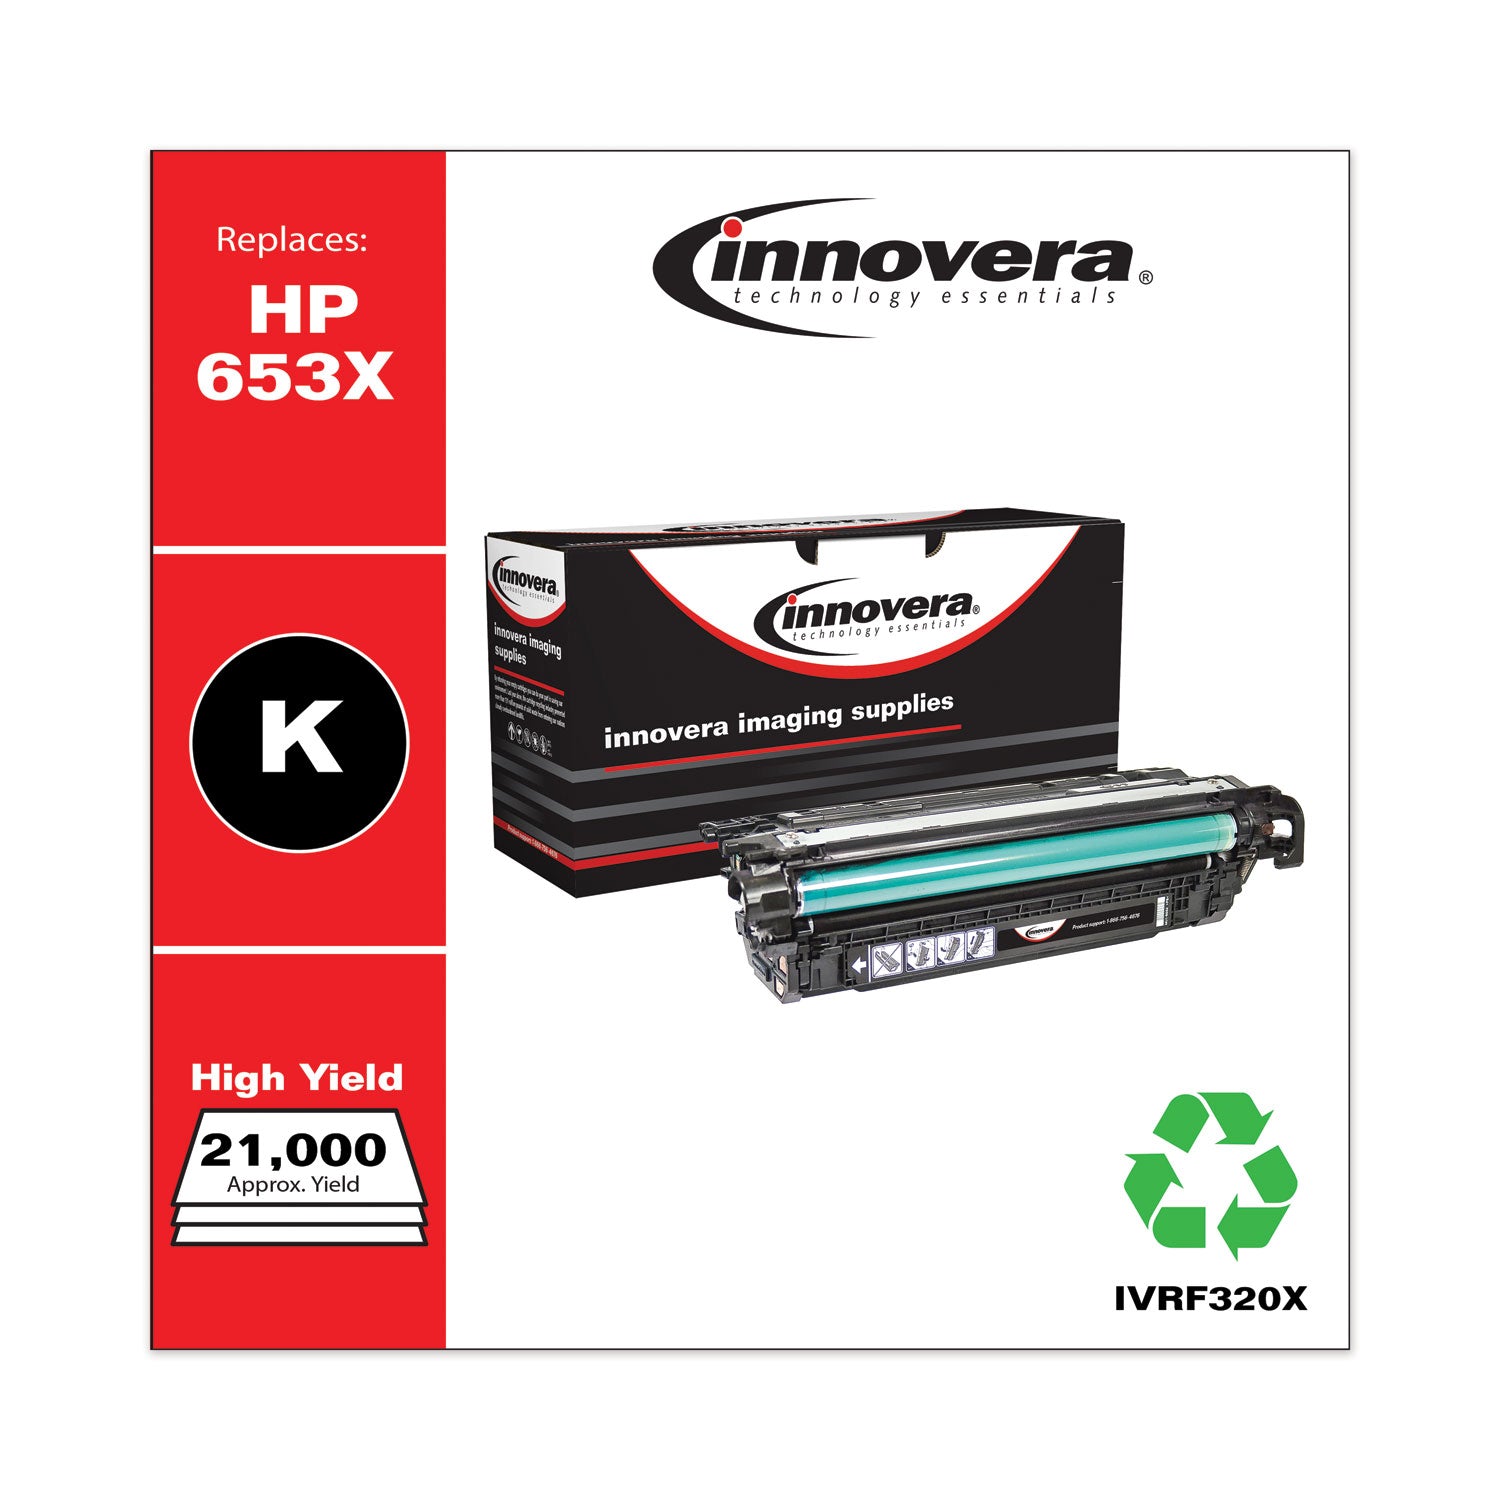 remanufactured-black-high-yield-toner-replacement-for-653x-cf320x-21000-page-yield-ships-in-1-3-business-days_ivrf320x - 2